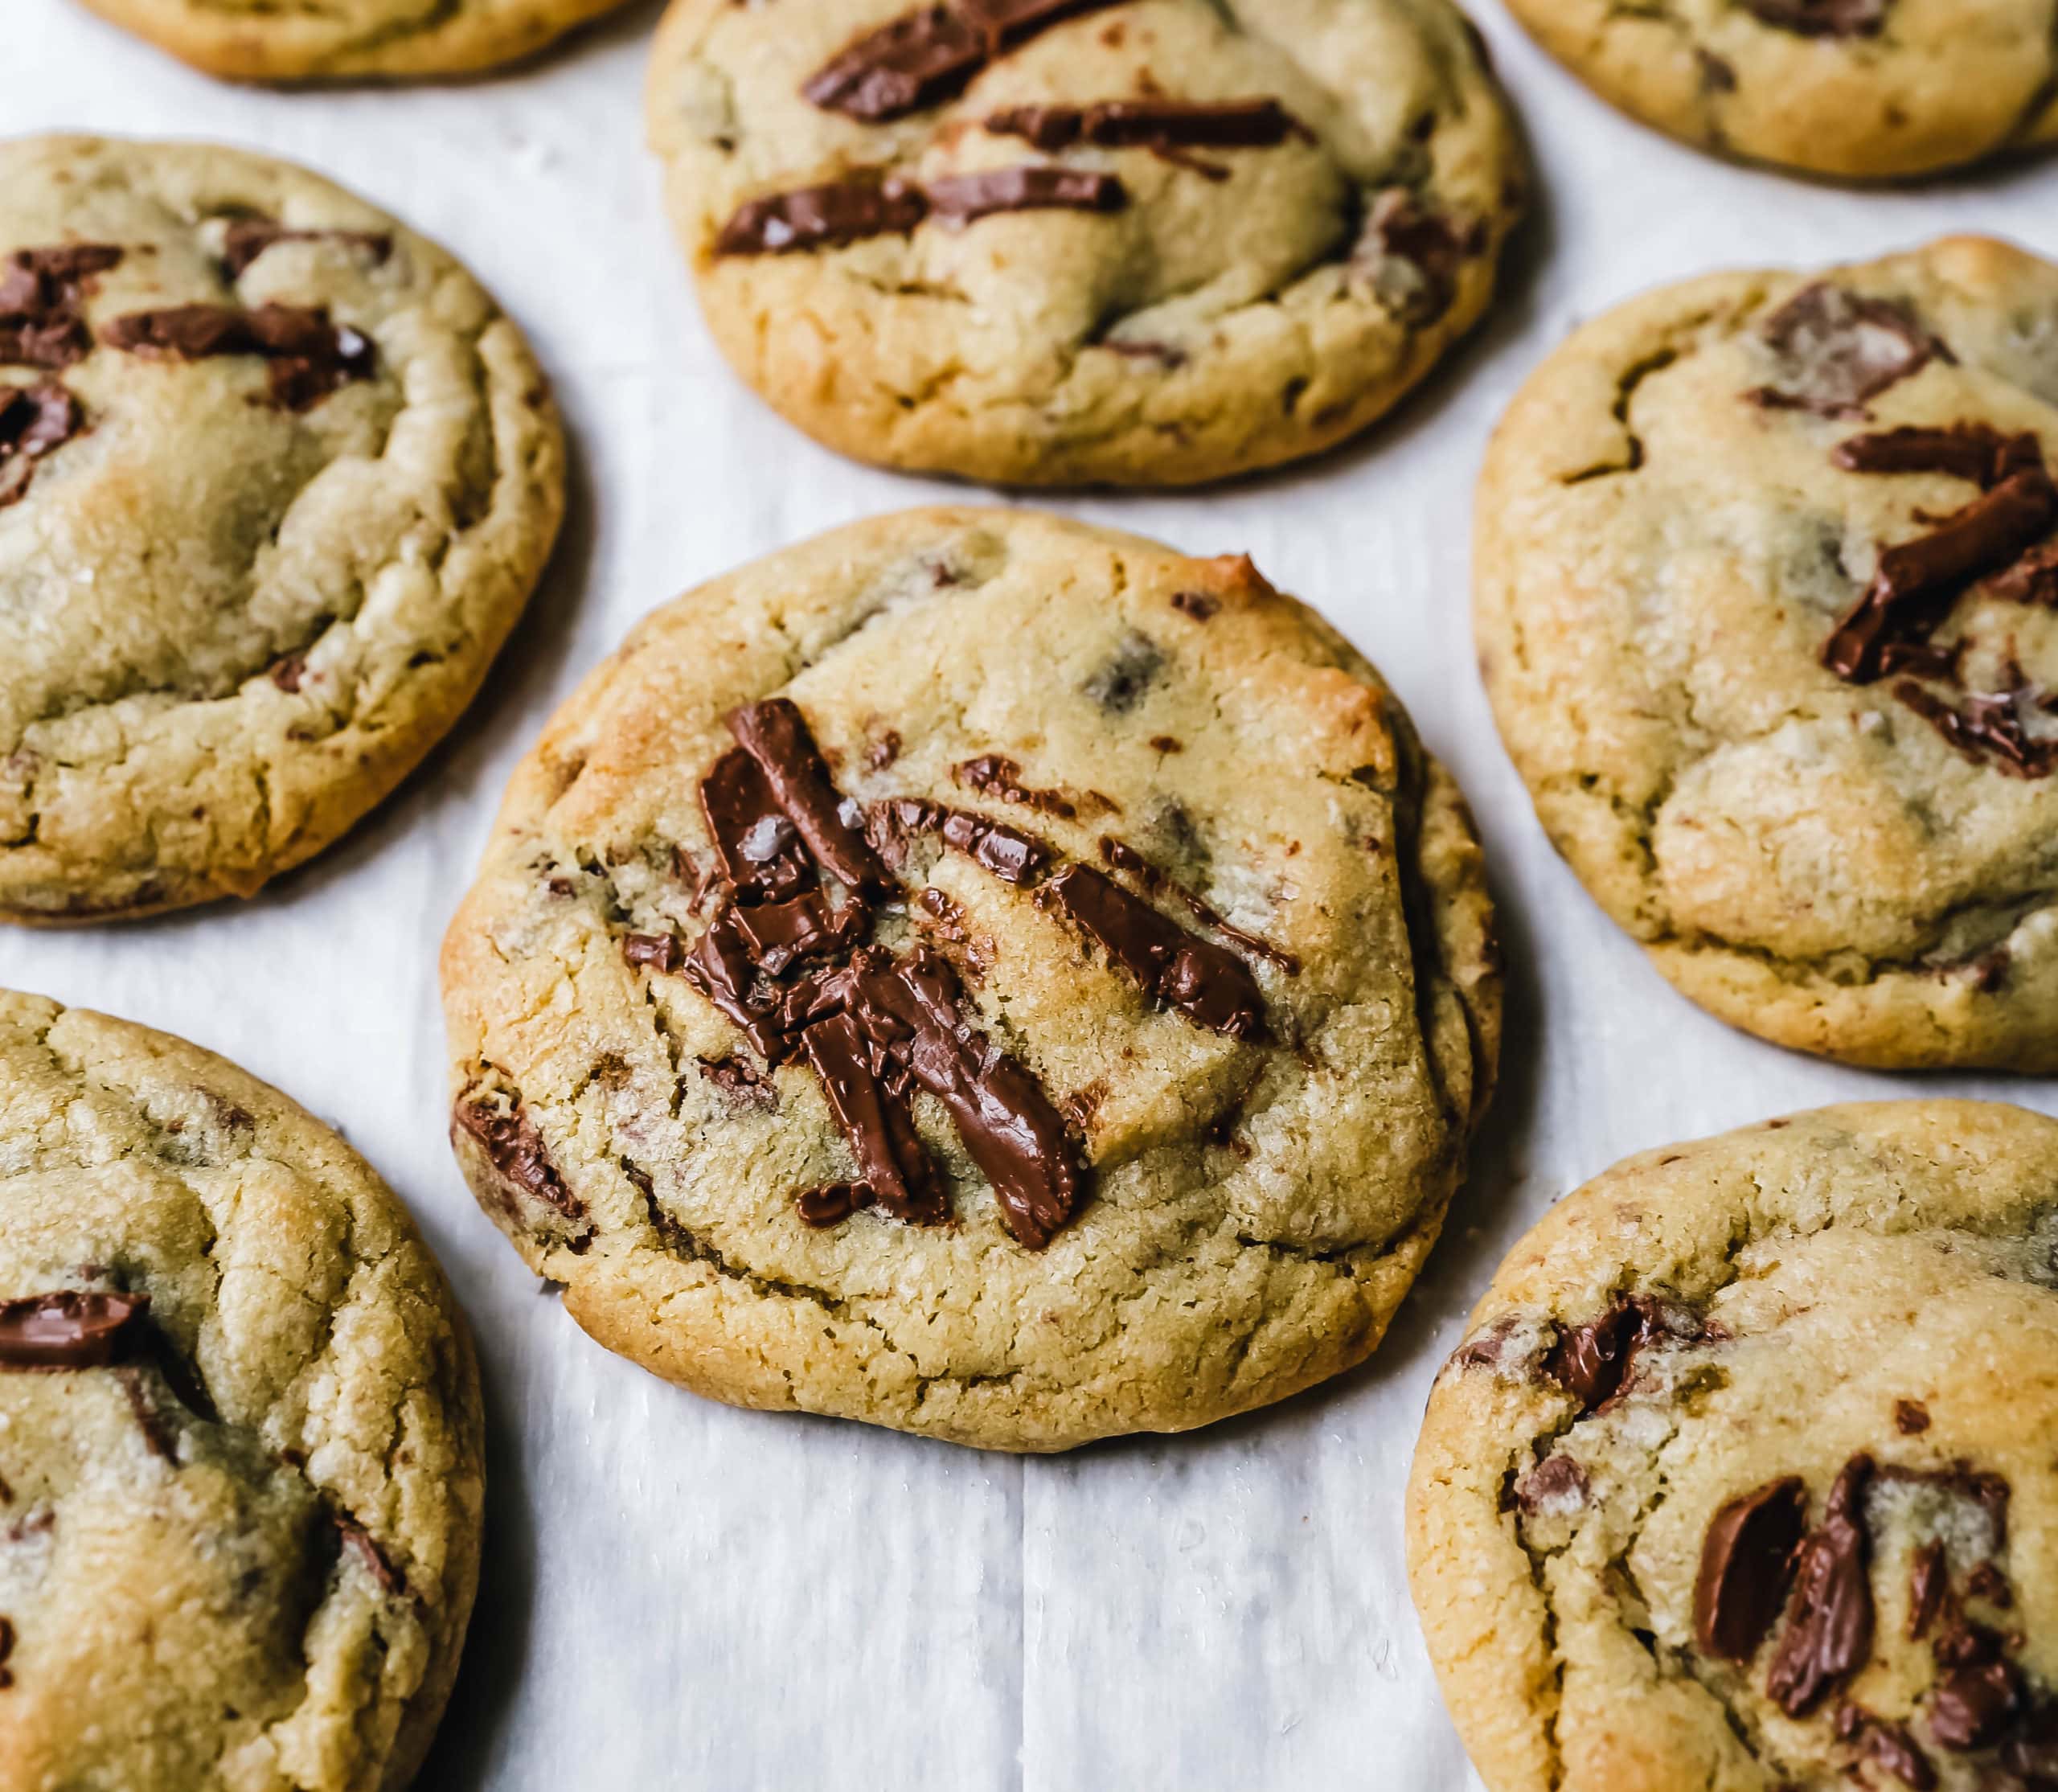 The Original Chocolate Chip Cookies – Chocolate and the Chip